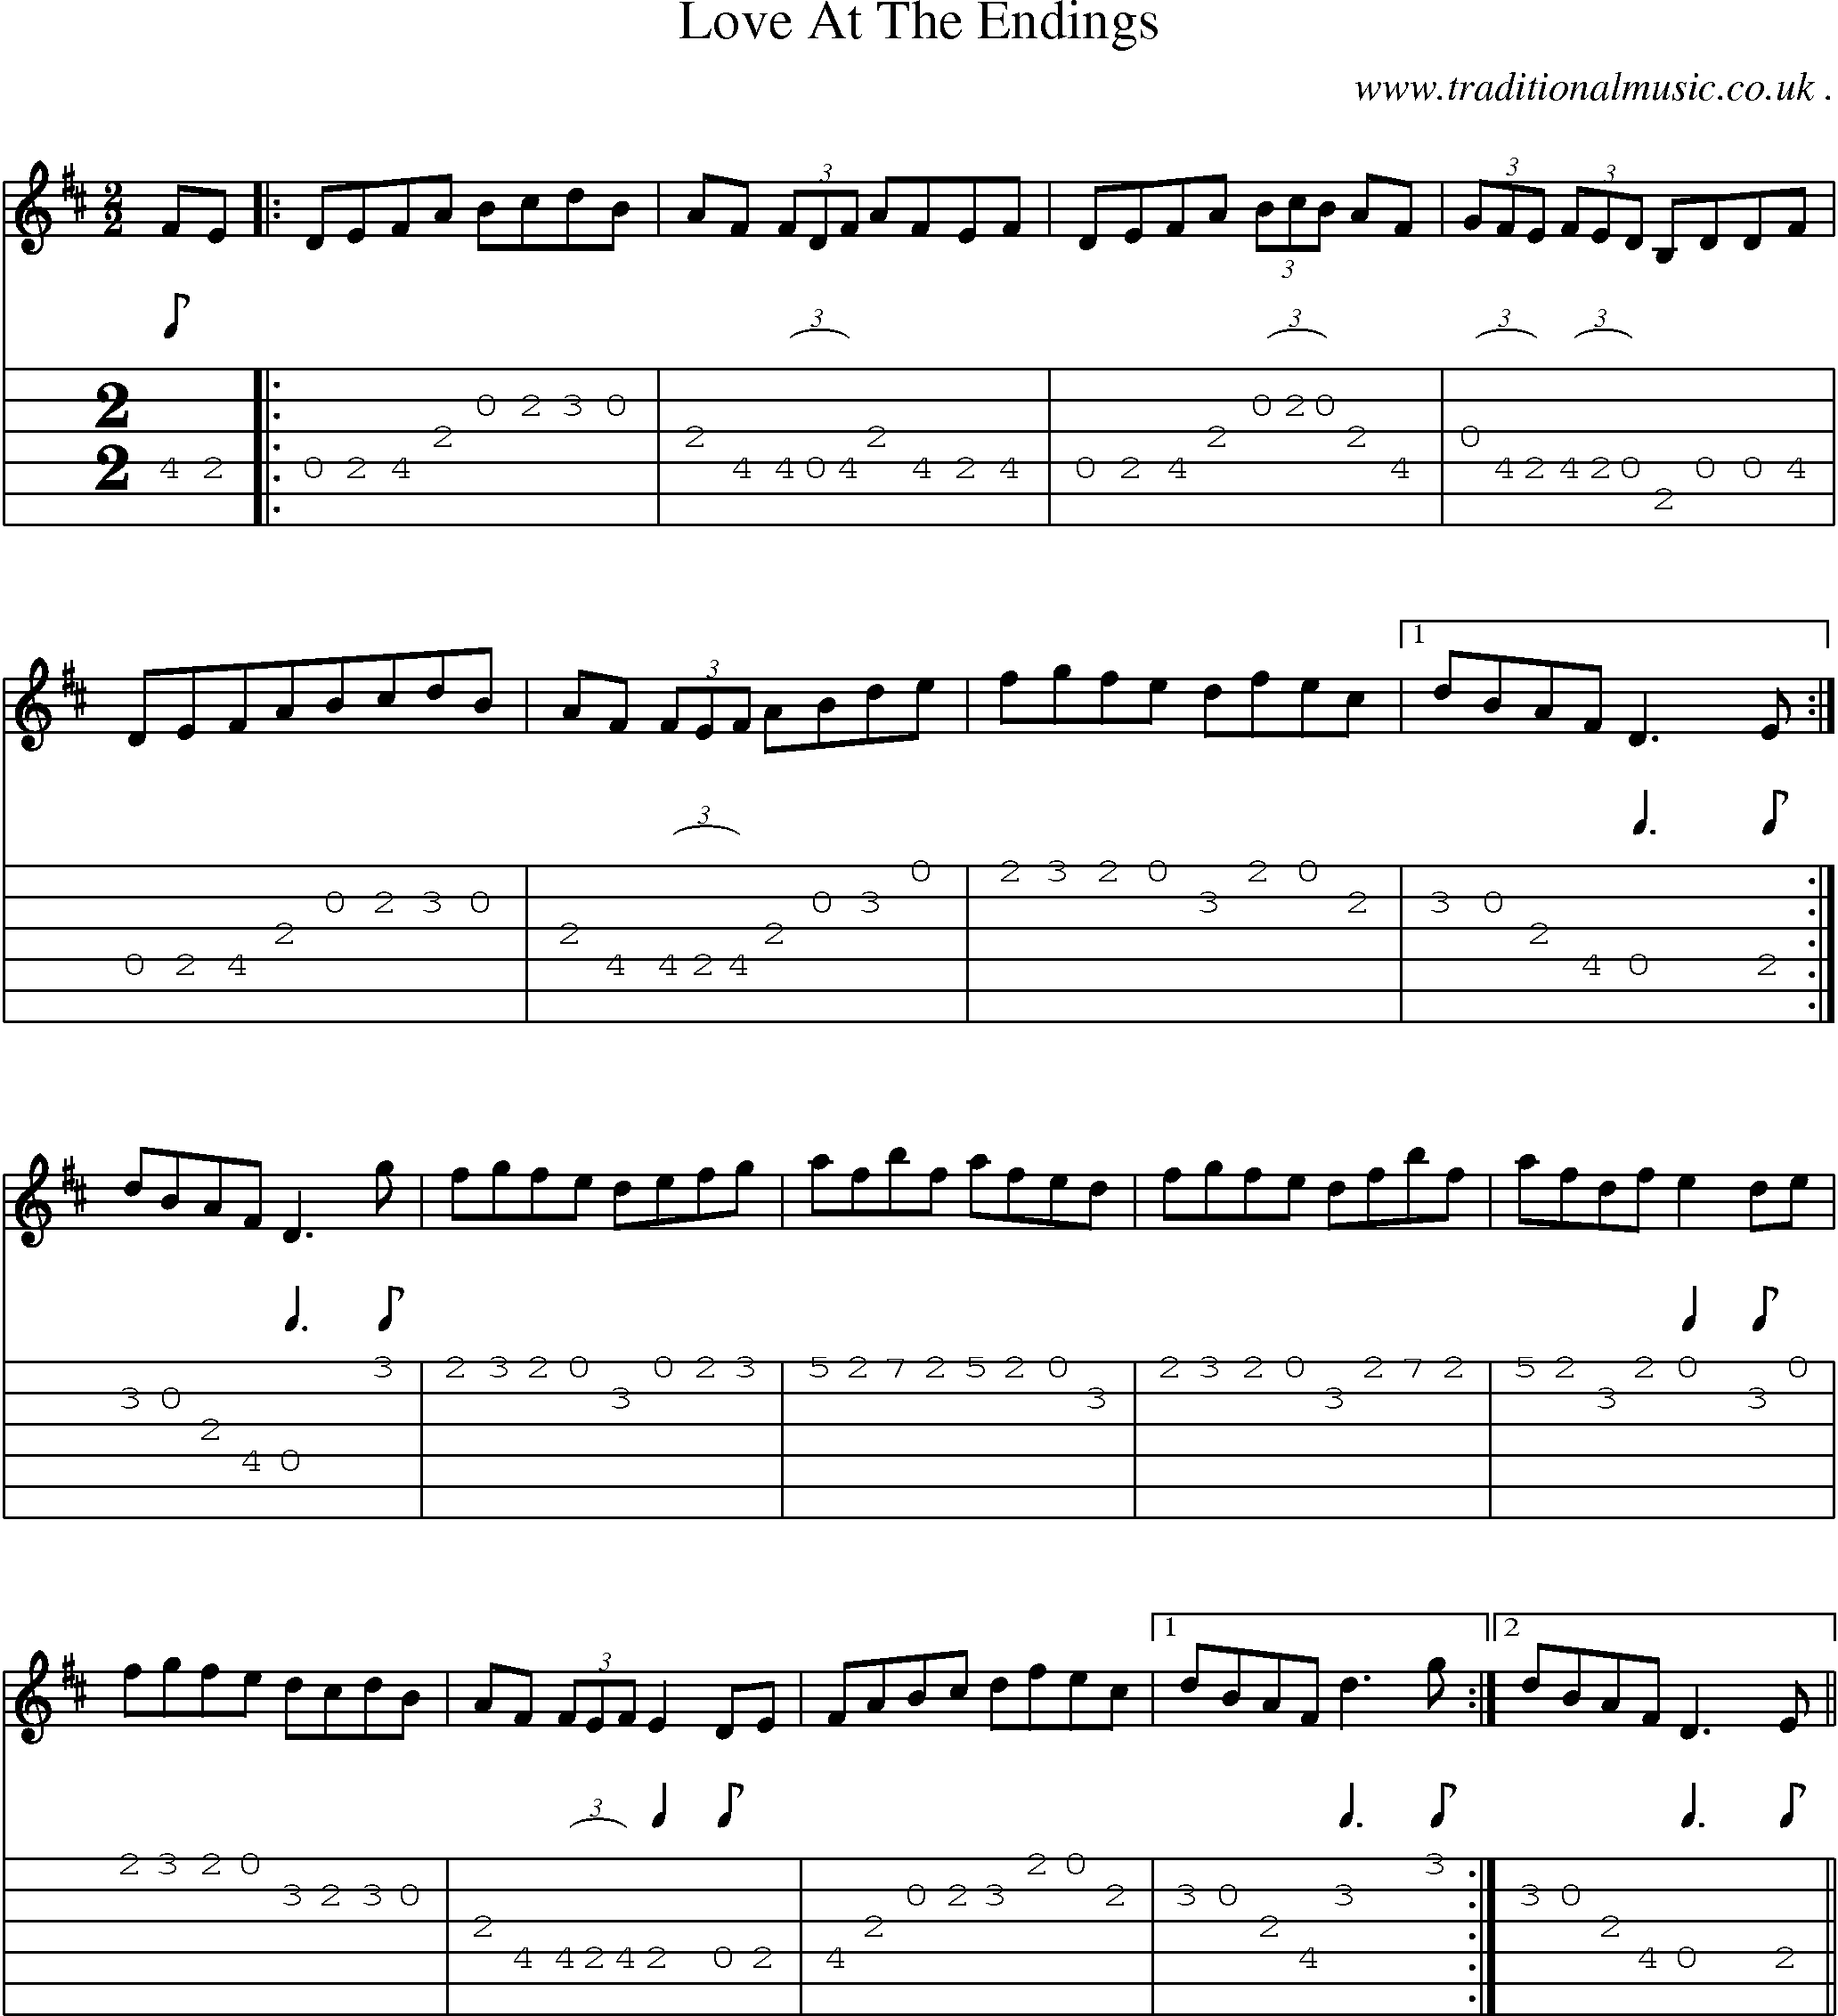 Sheet-Music and Guitar Tabs for Love At The Endings